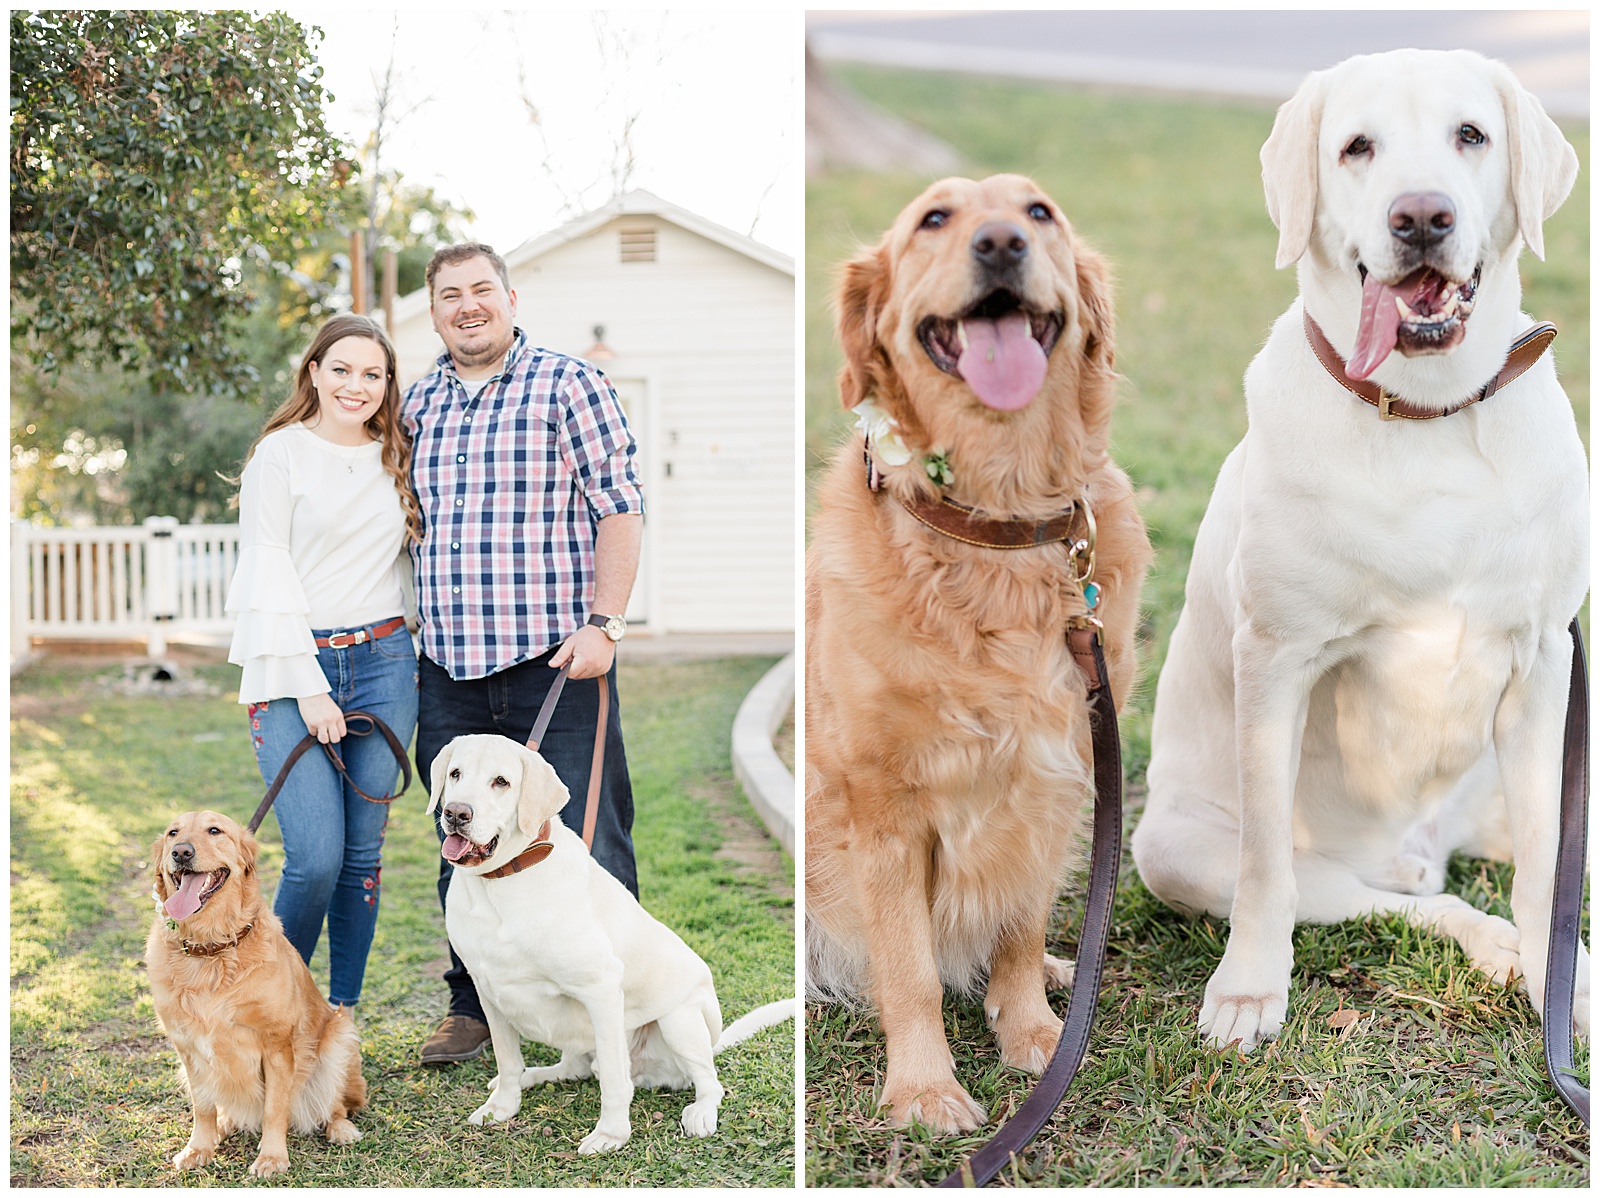 Planning a wedding dogs in engagement photos